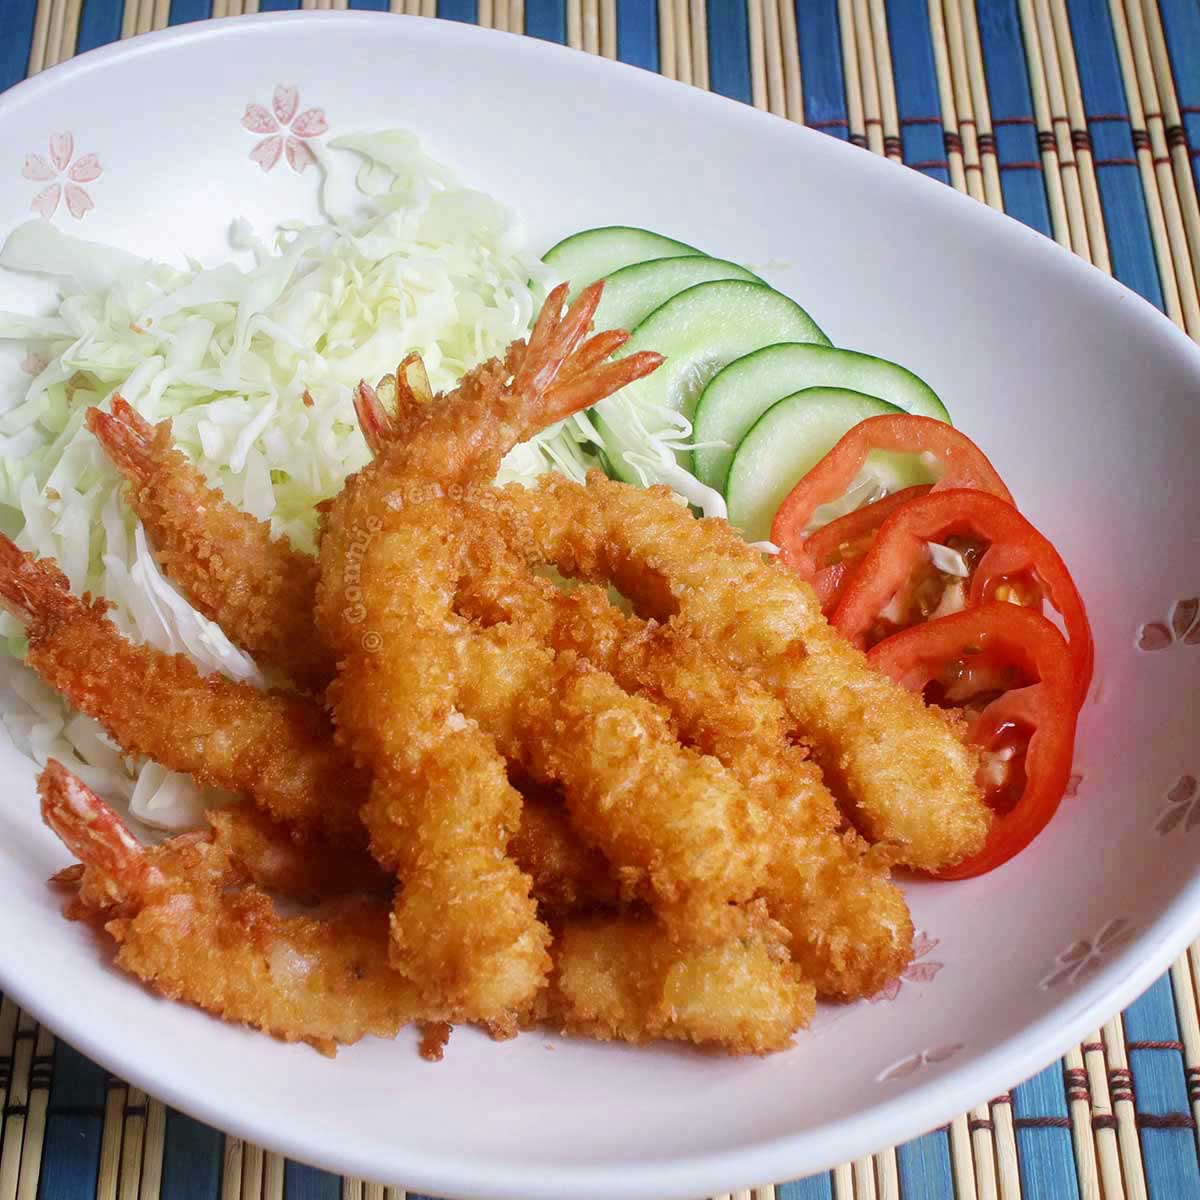 Ebi furai (Japanese shrimp fry) with shredded cabbage, cucumber and tomato slices